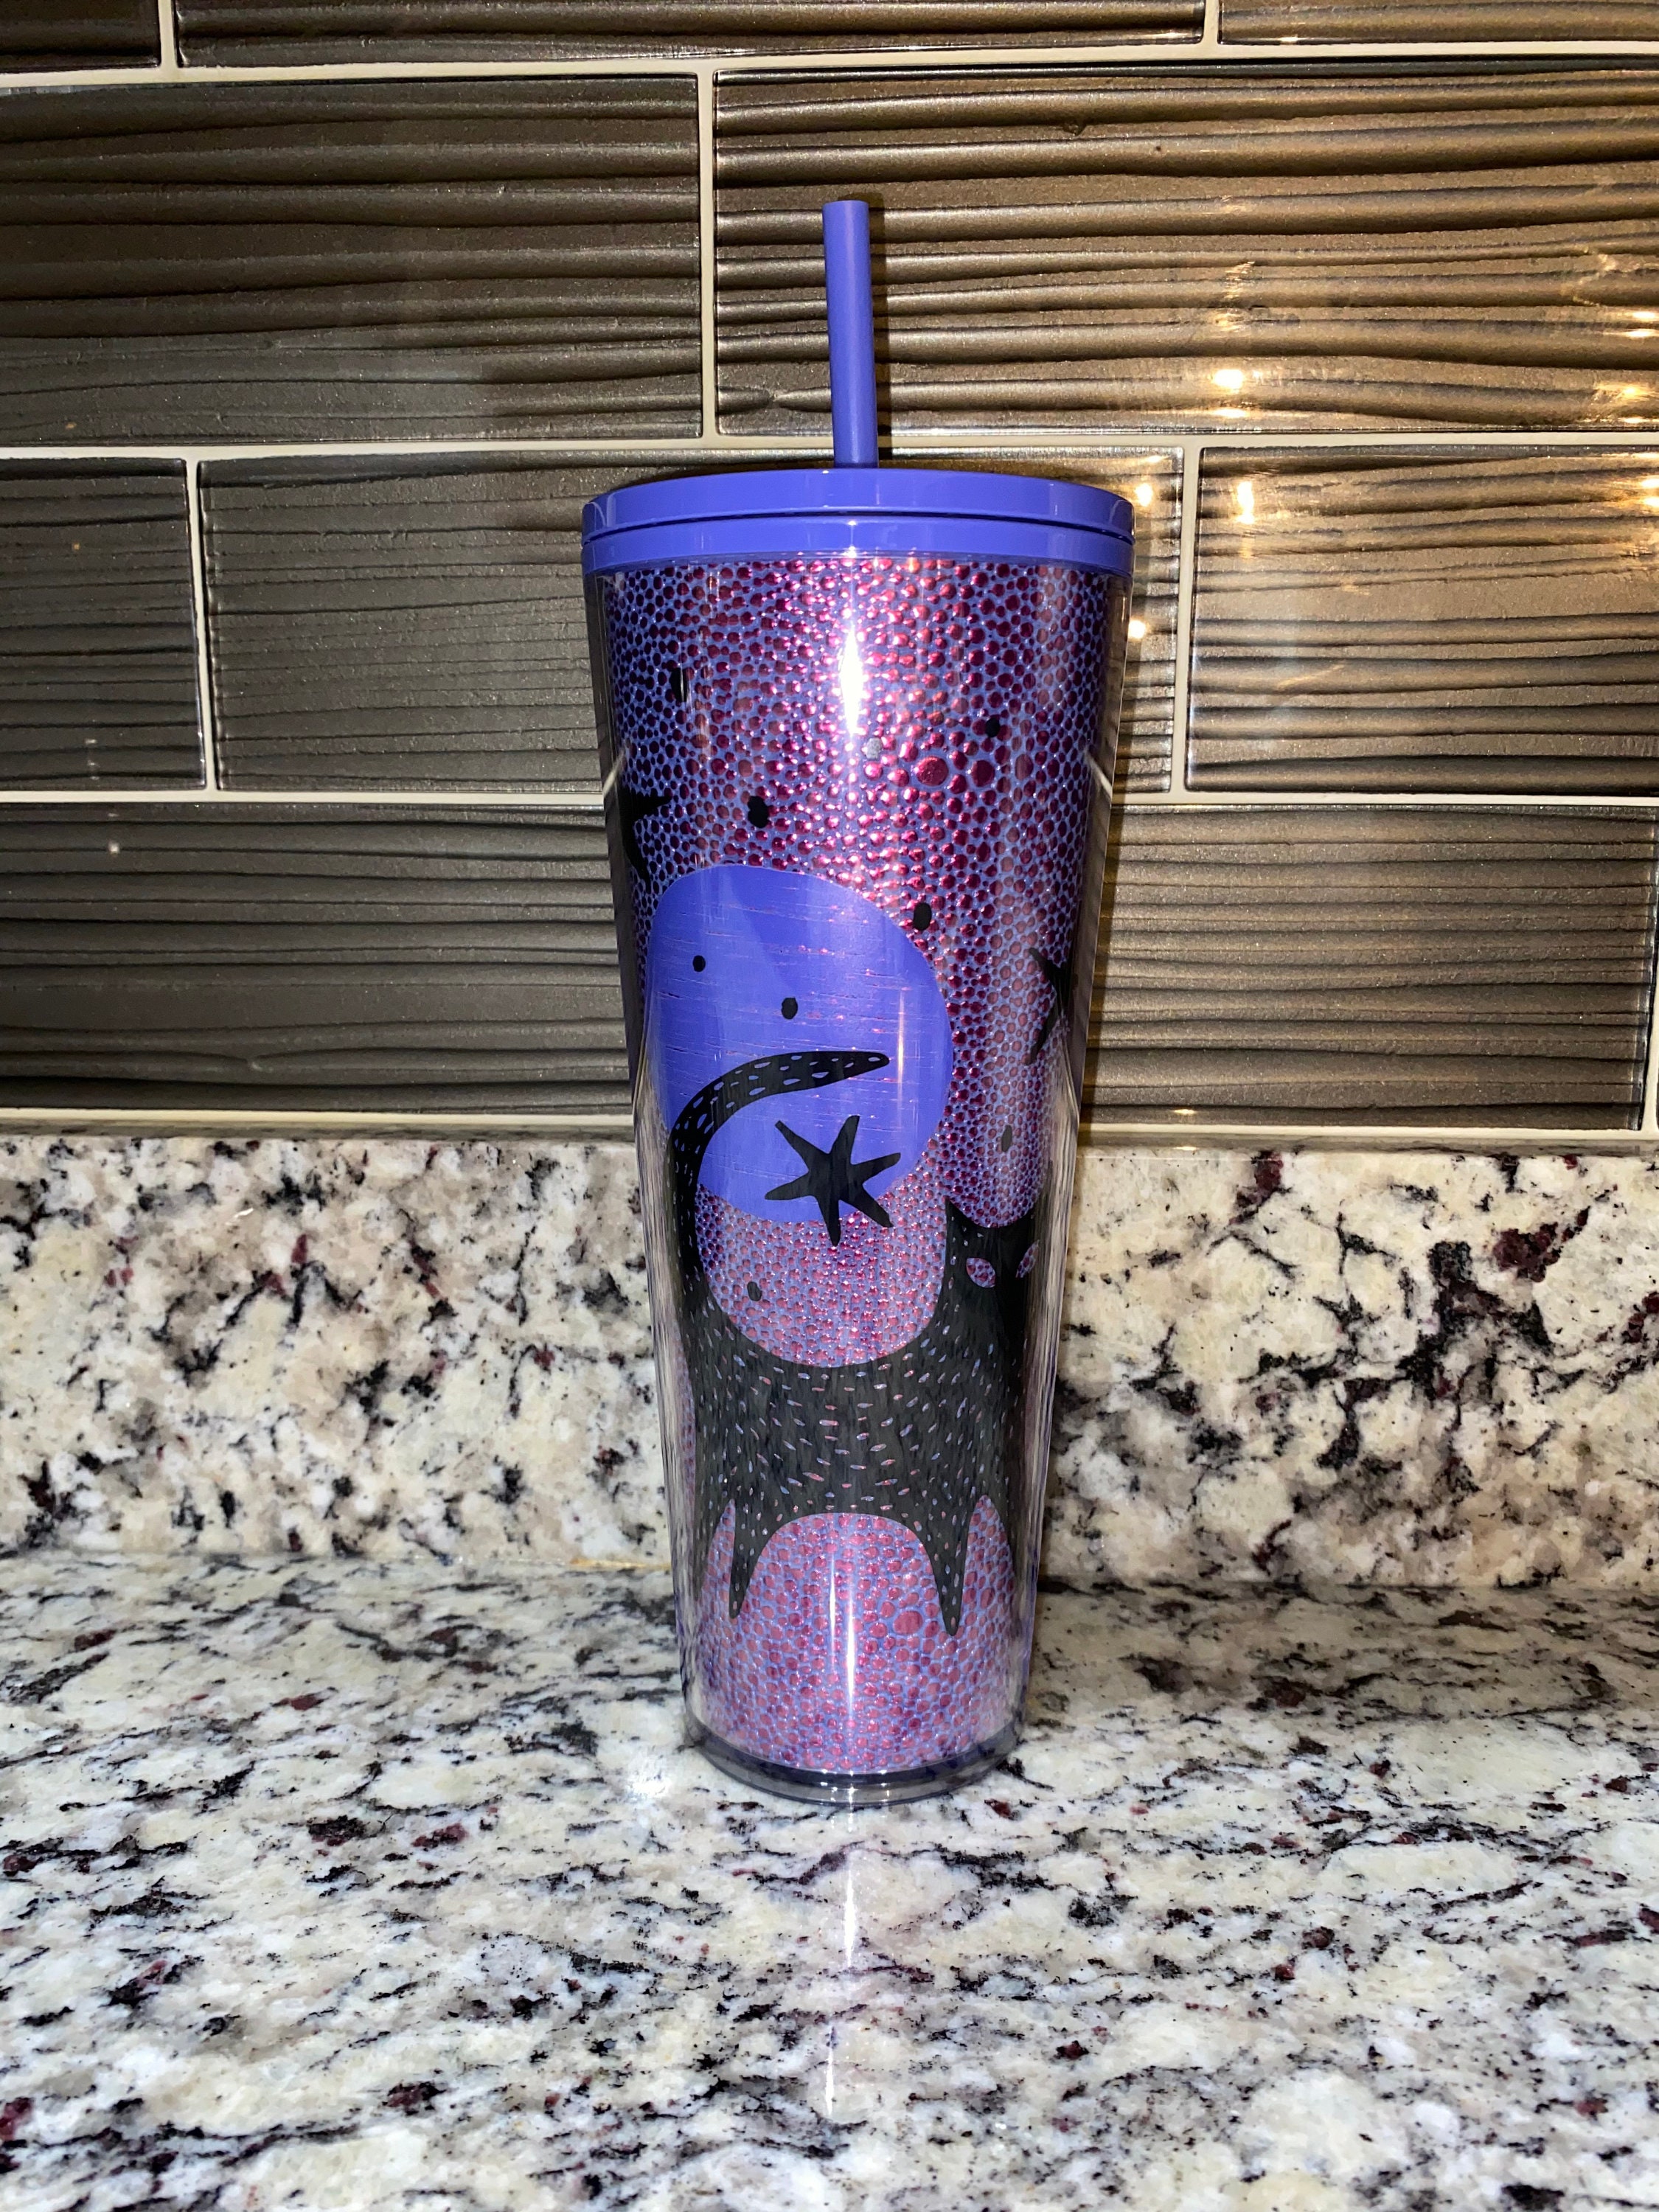 Black Cats Starbucks Reusable Hot Cup – Twisted Magenta